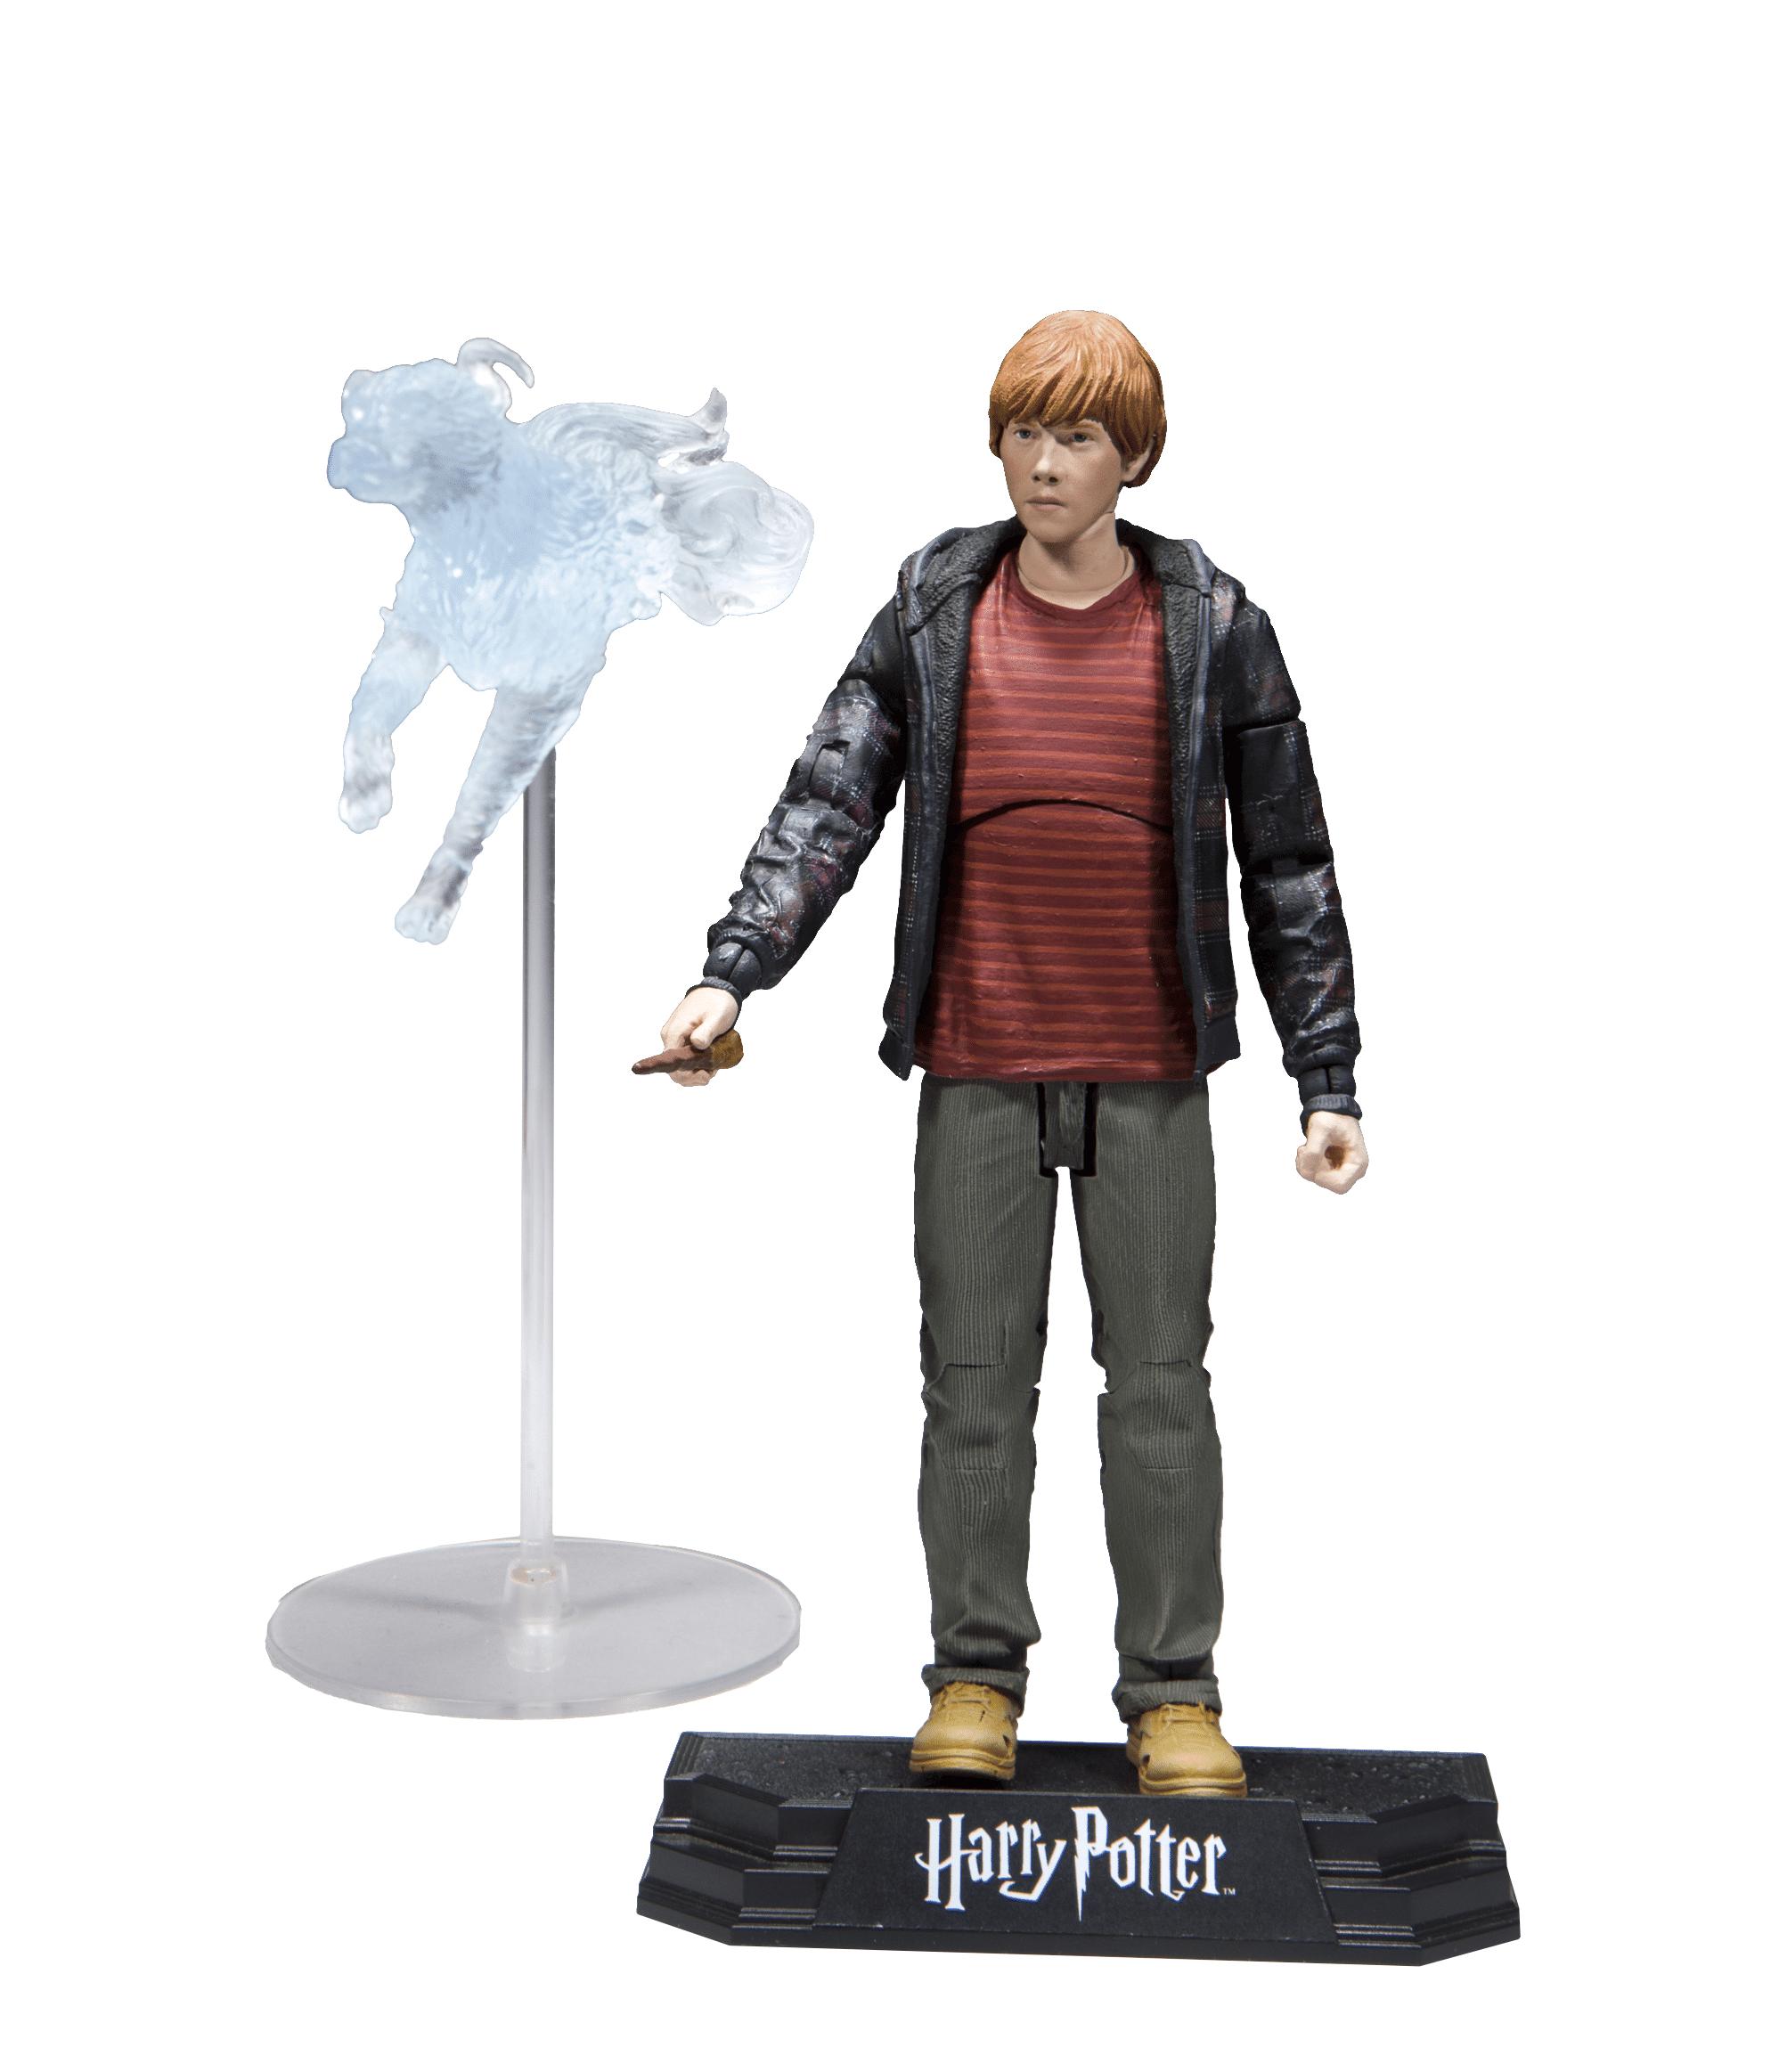 NEW S.H Figuarts Harry Potter & the Sorcerer's Stone Action Figure US SELLER 